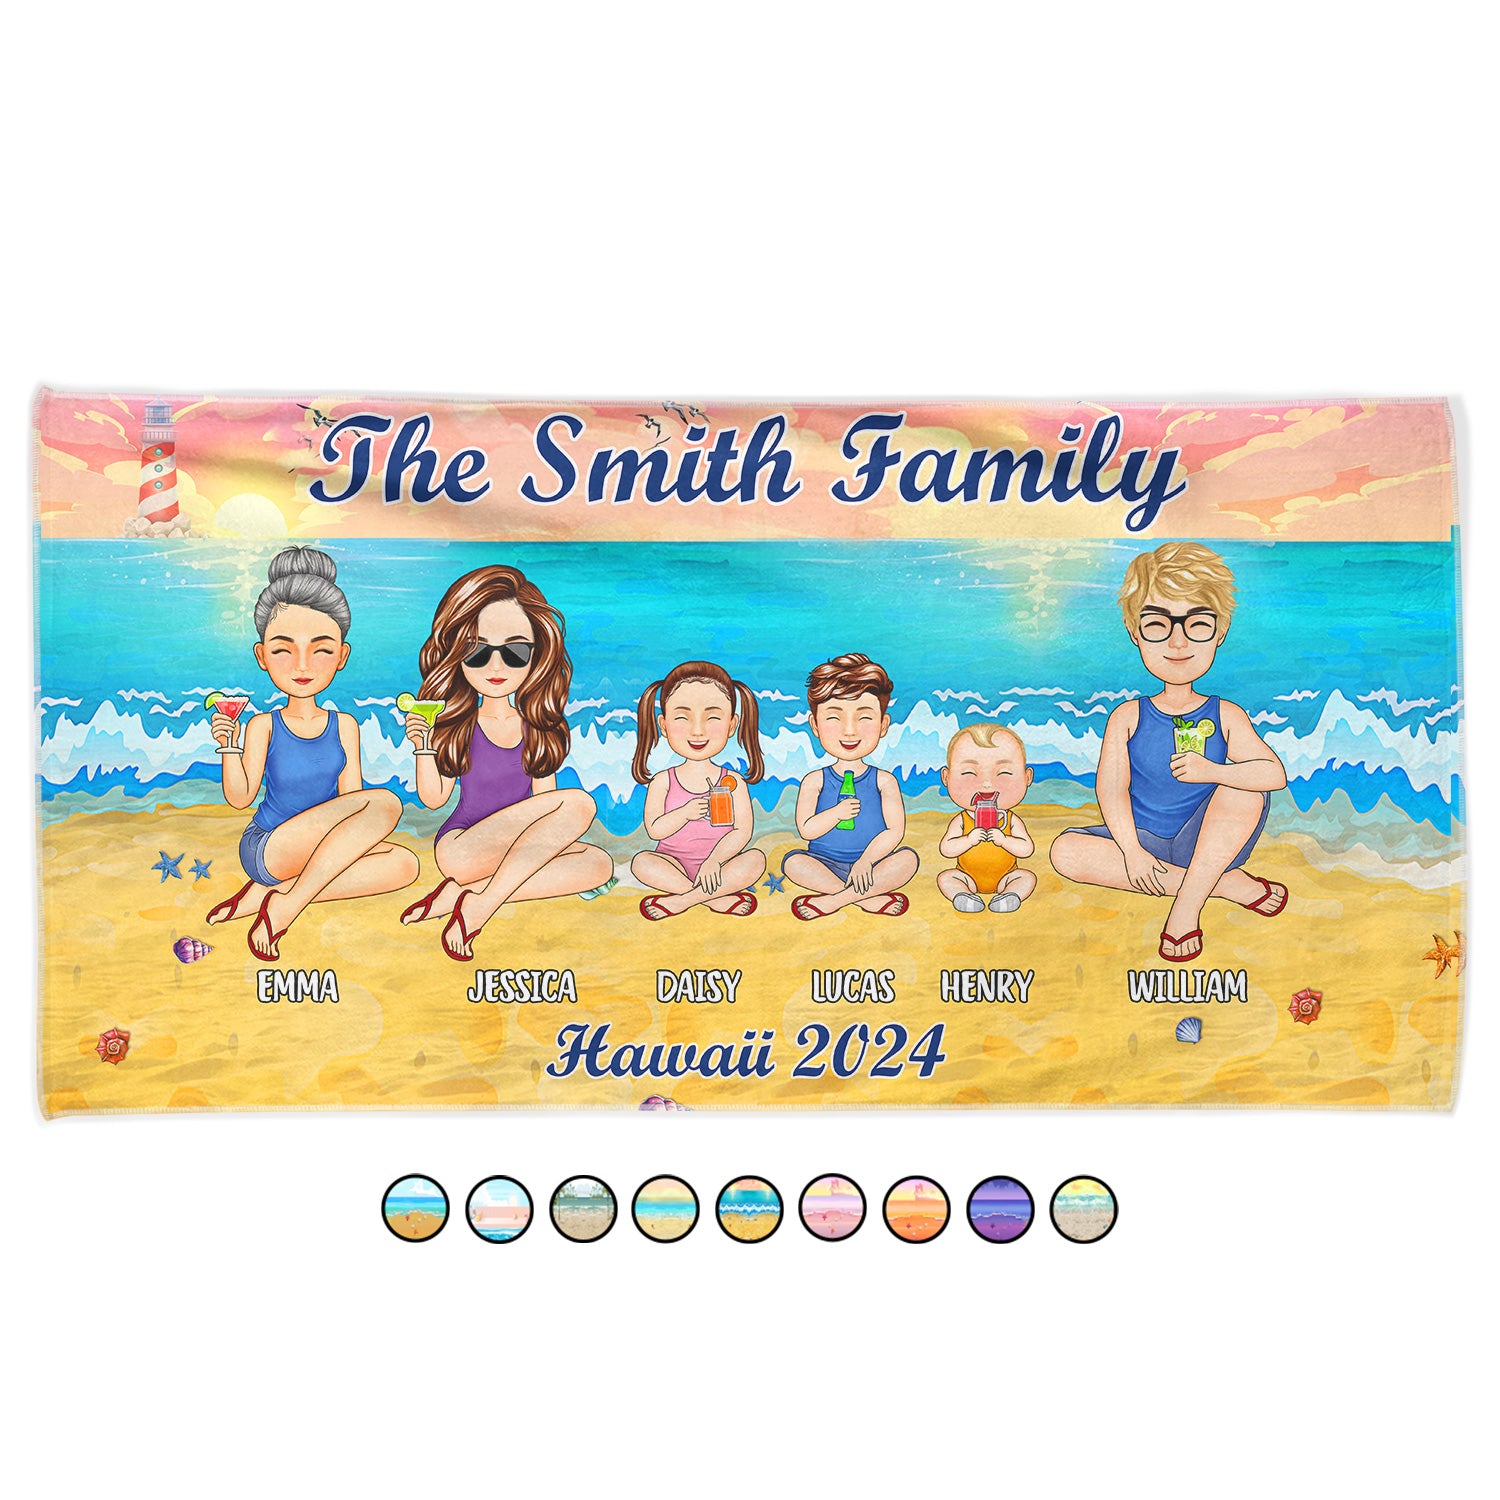 Vacation Trip Family - Gift For Family, Friends, Siblings - Personalized Beach Towel